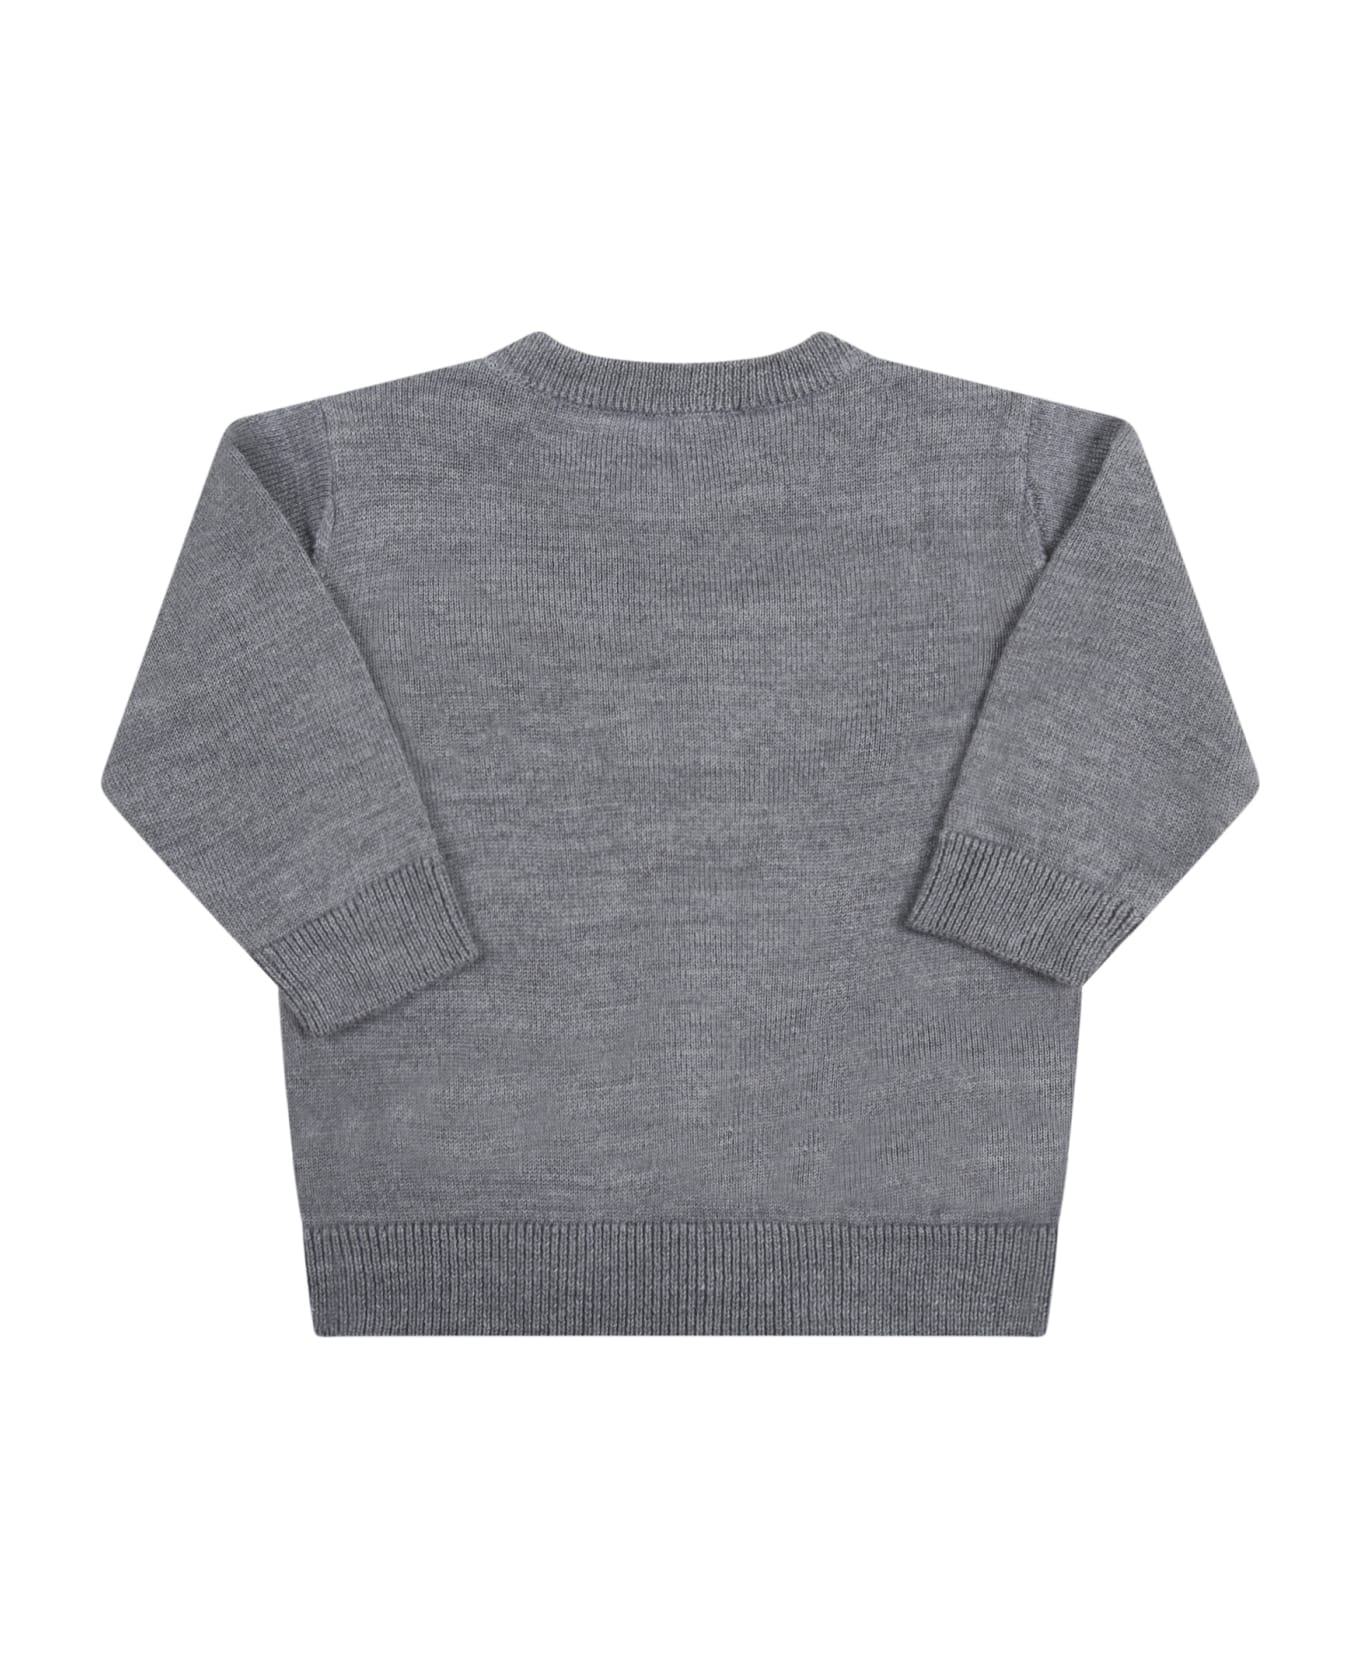 Armani embroidered Collezioni Grey Sweater For Baby Boy With Eagle - Grey